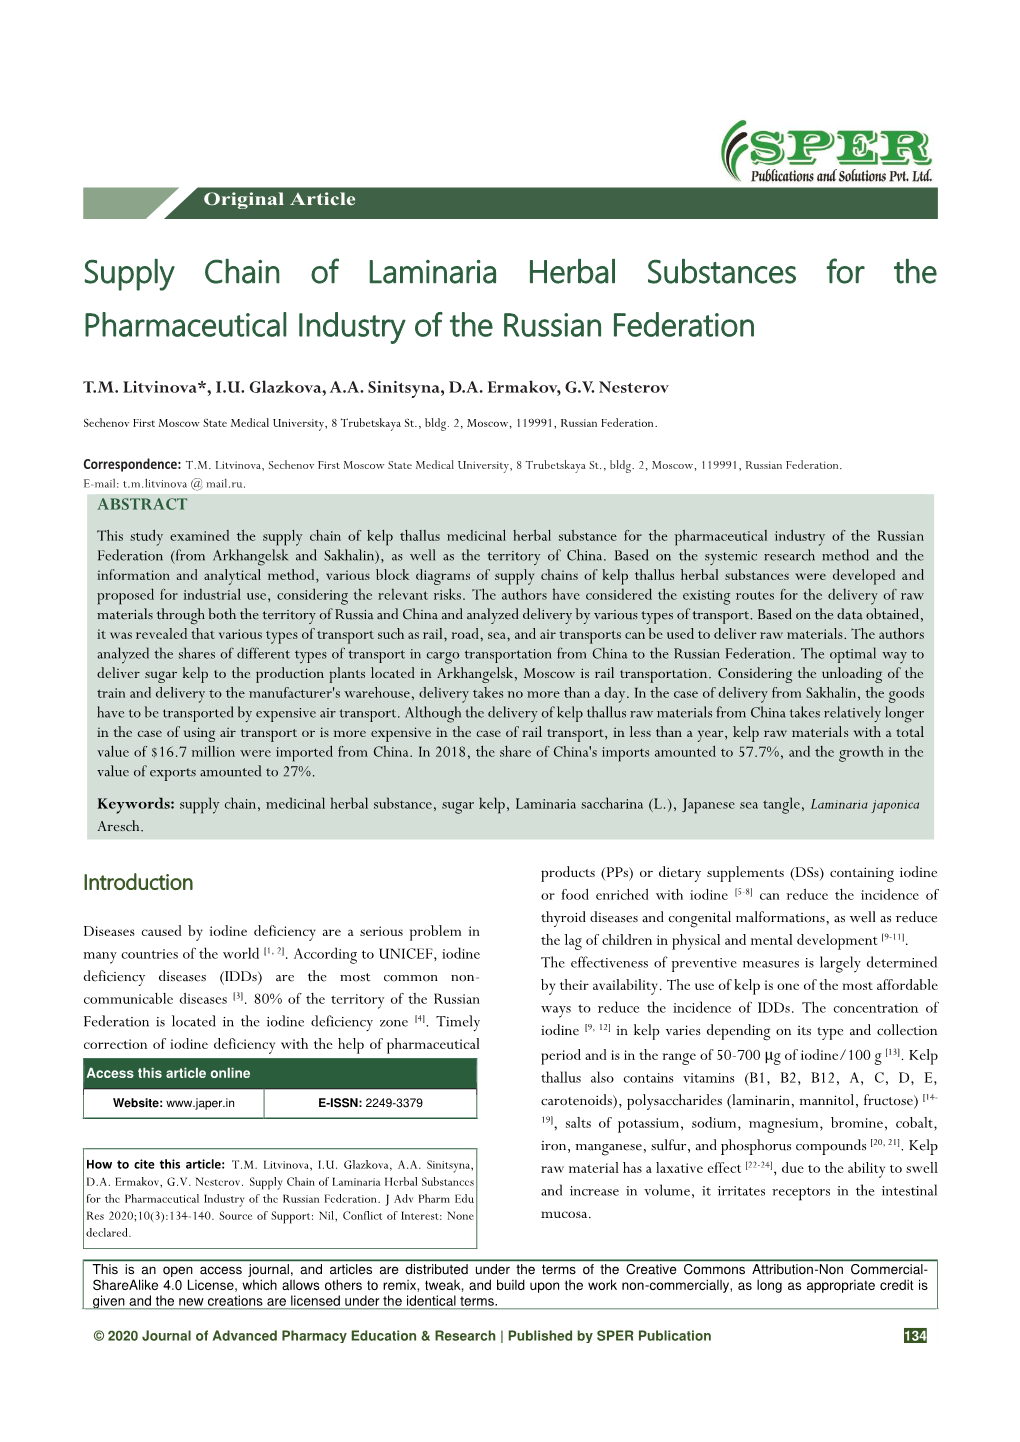 Supply Chain of Laminaria Herbal Substances for the Pharmaceutical Industry of the Russian Federation